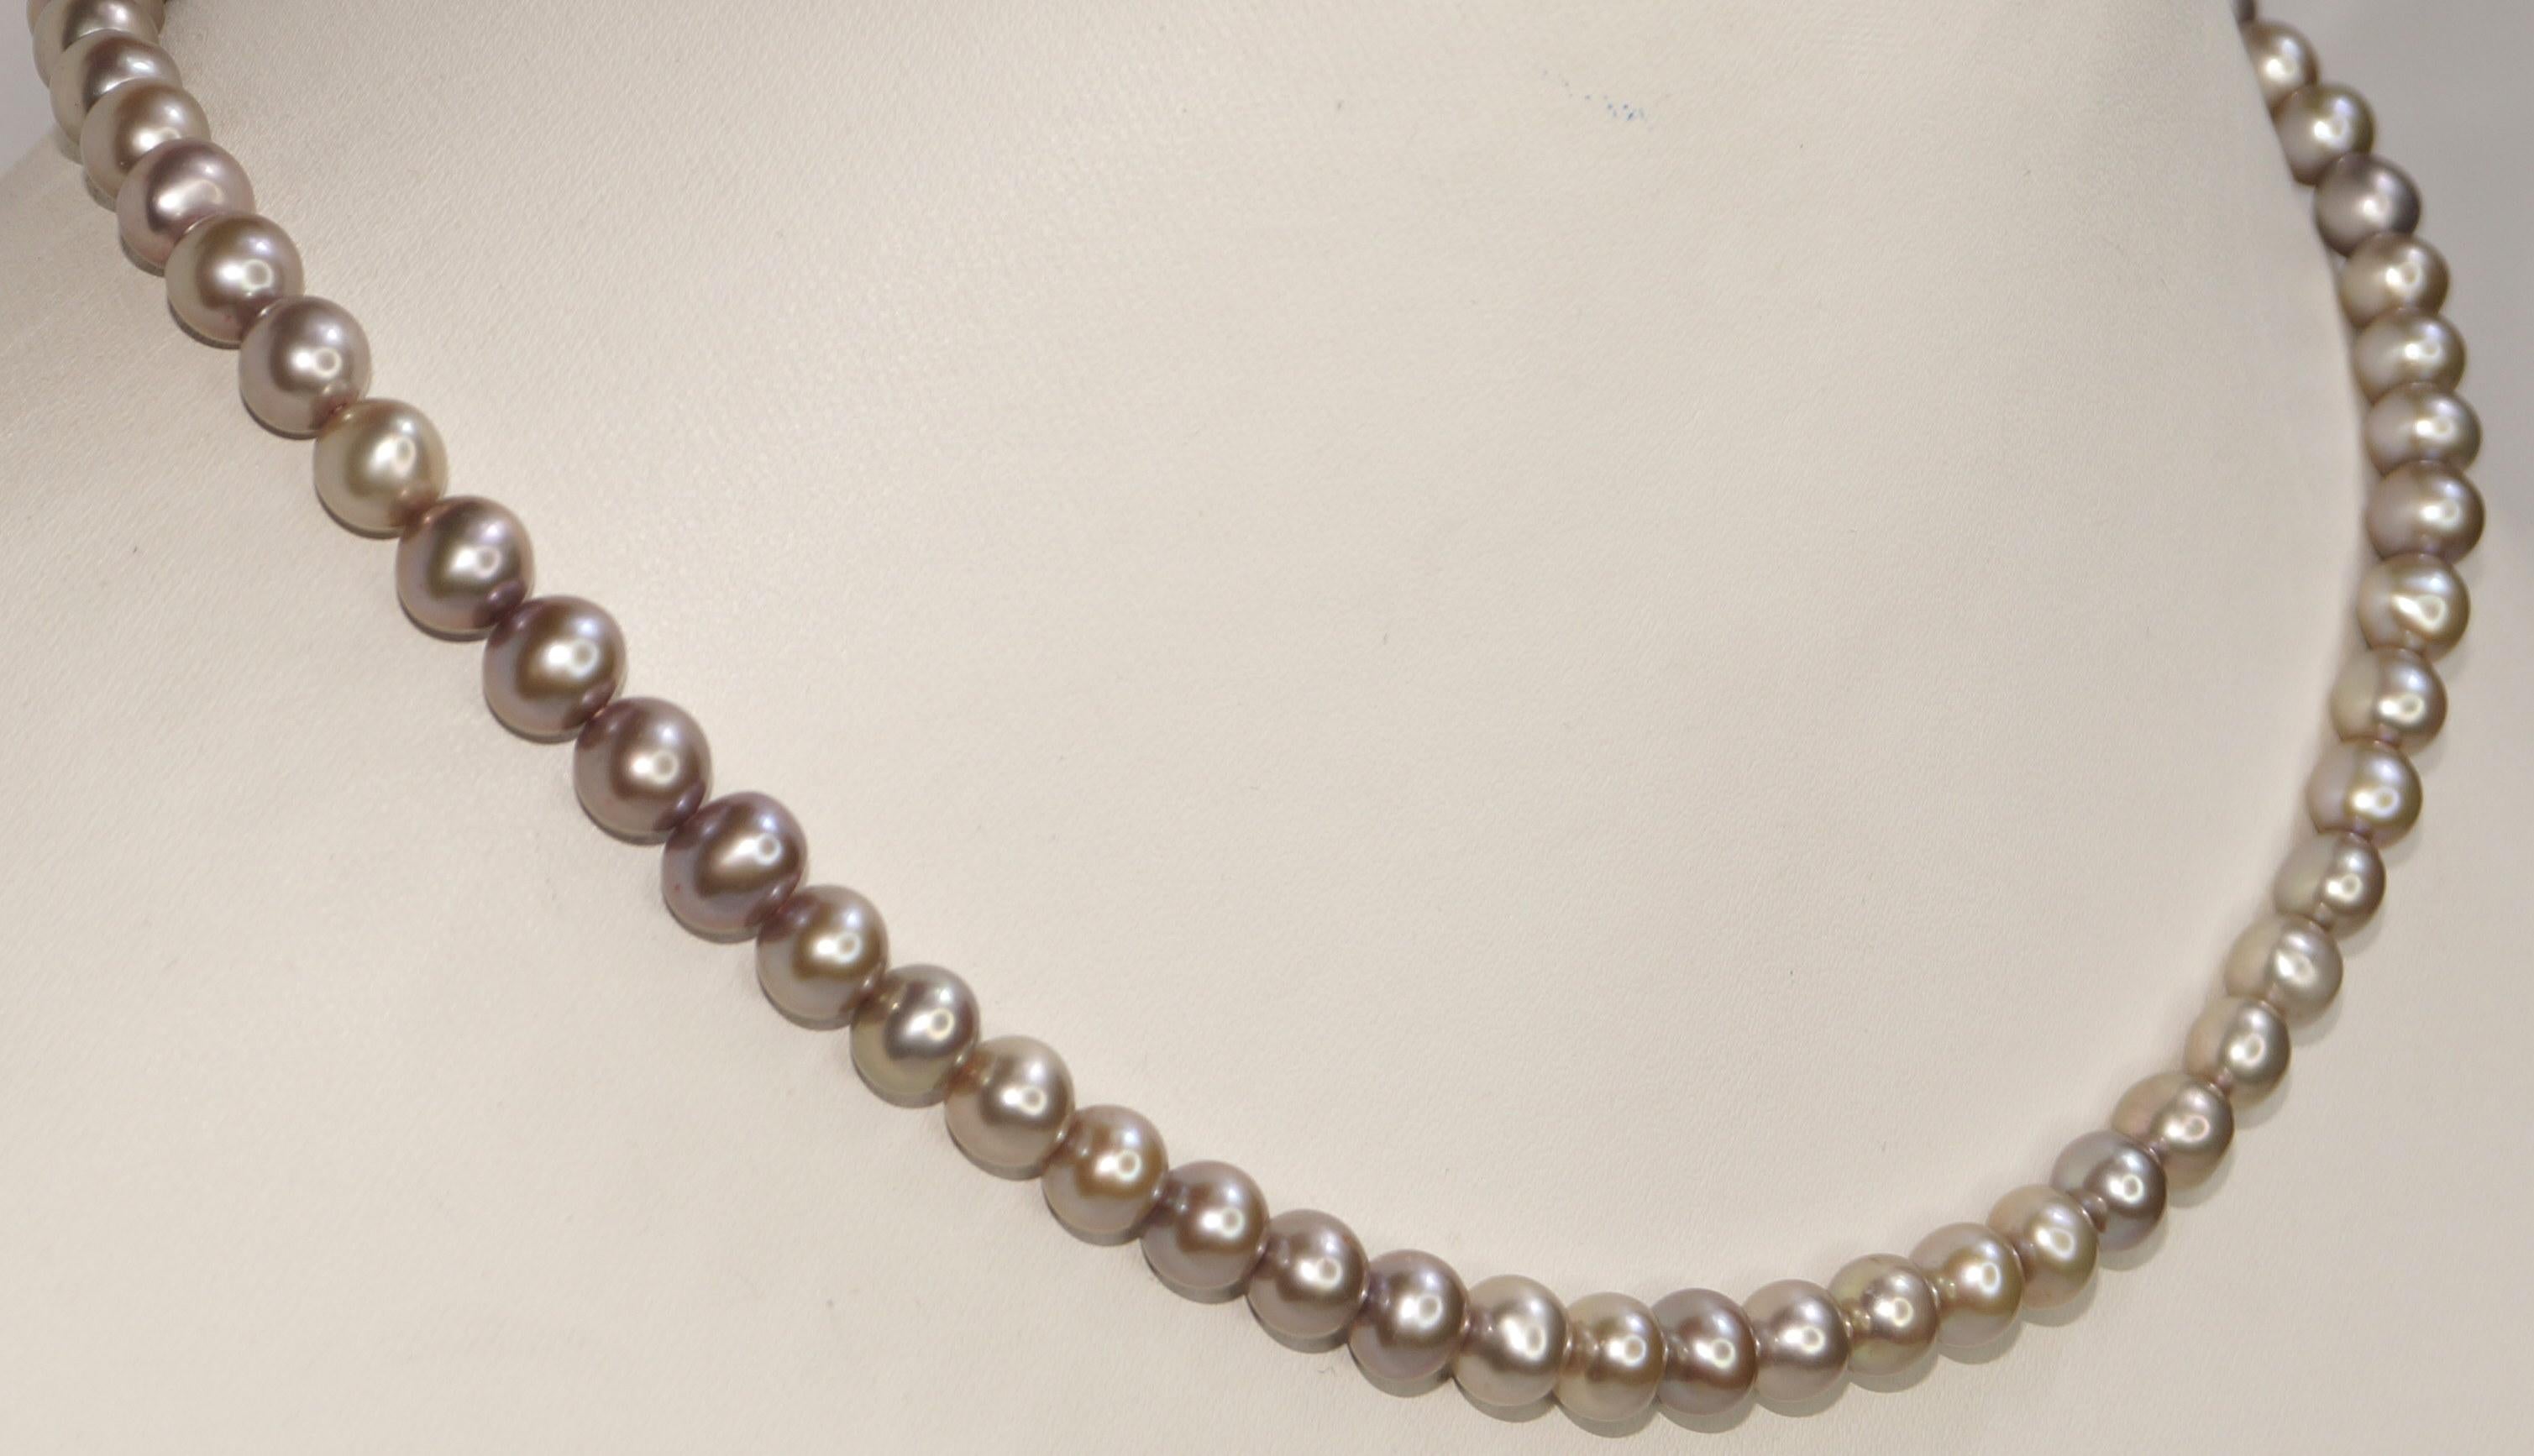 7mm necklace size